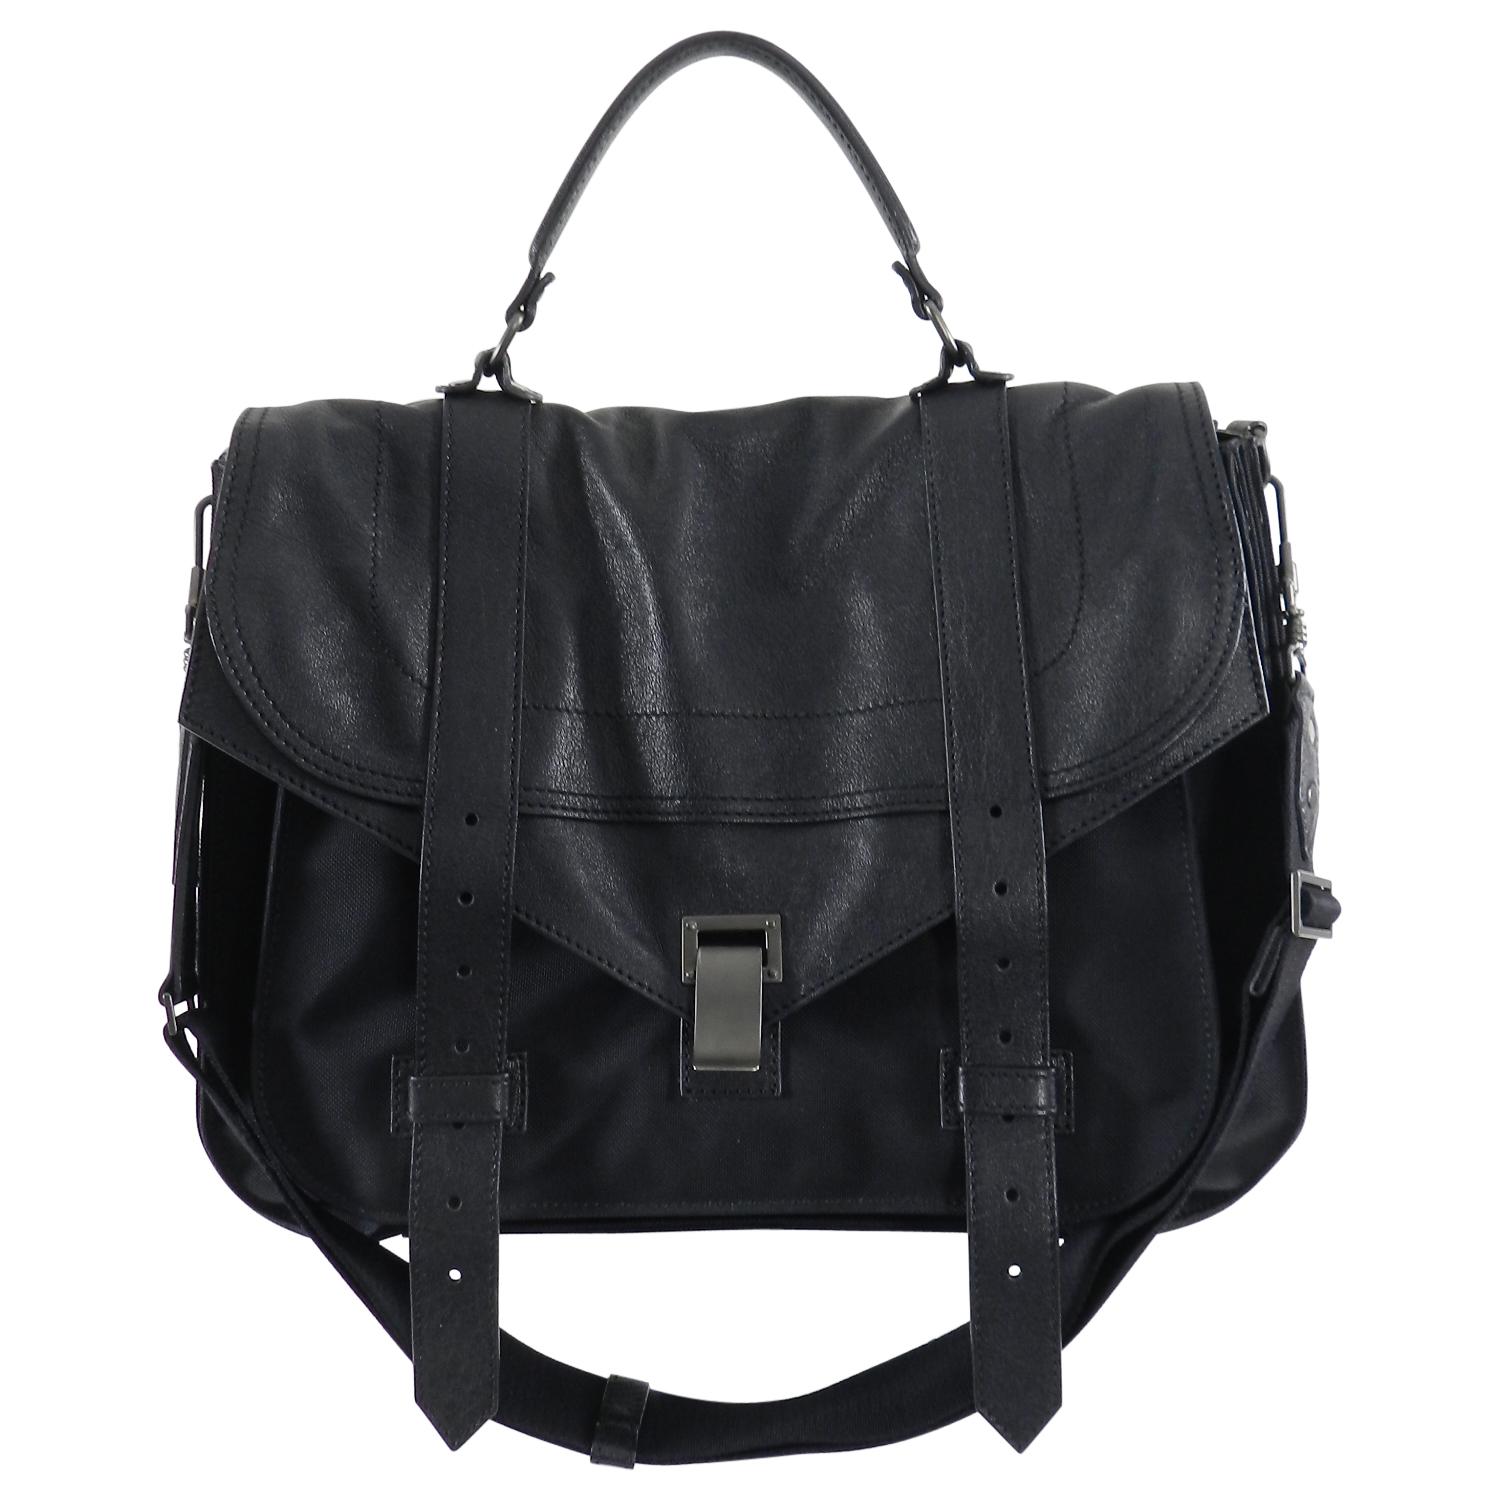 Proenza Schouler PS1 Extra Large Black Leather and Nylon Bag.  Brand new unworn with plastic still on hang tag.  Black leather with nylon body and adjustable web strap.  Dark gunmetal black hardware.  Size Extra Large PS1 measuring about 16 x 11.5 x